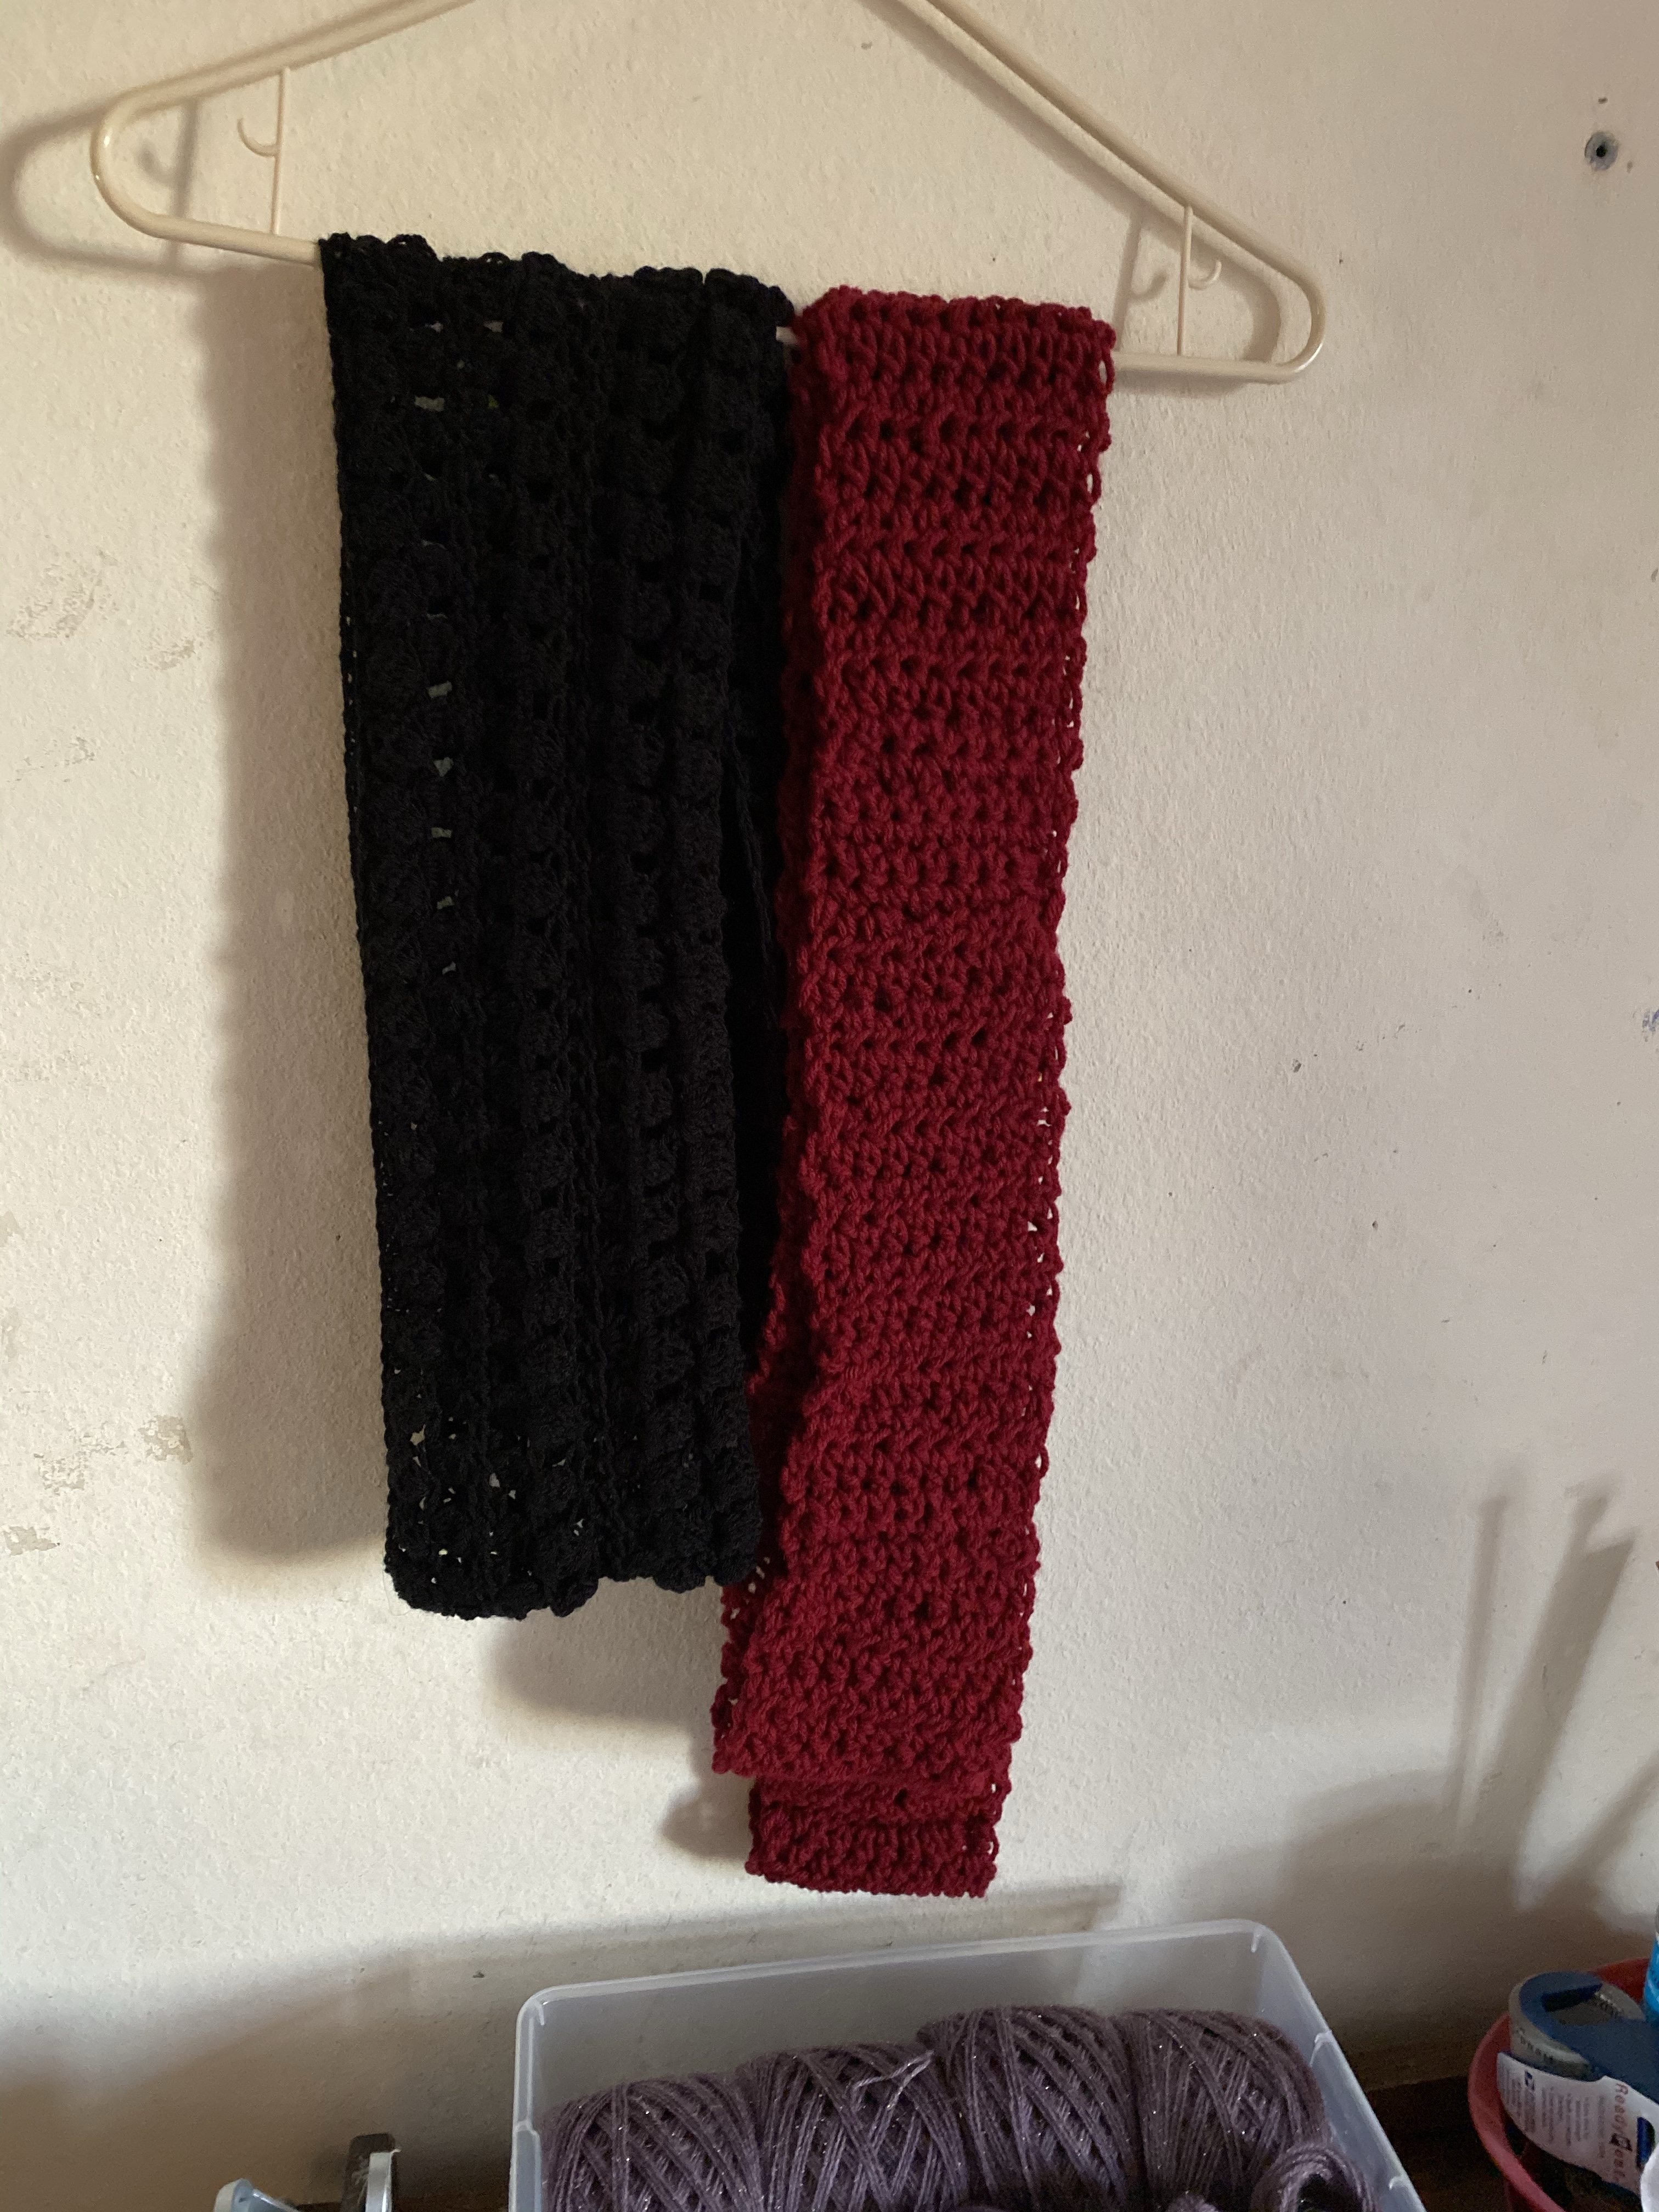 Black scarf on left, Red crochet scarf on the right